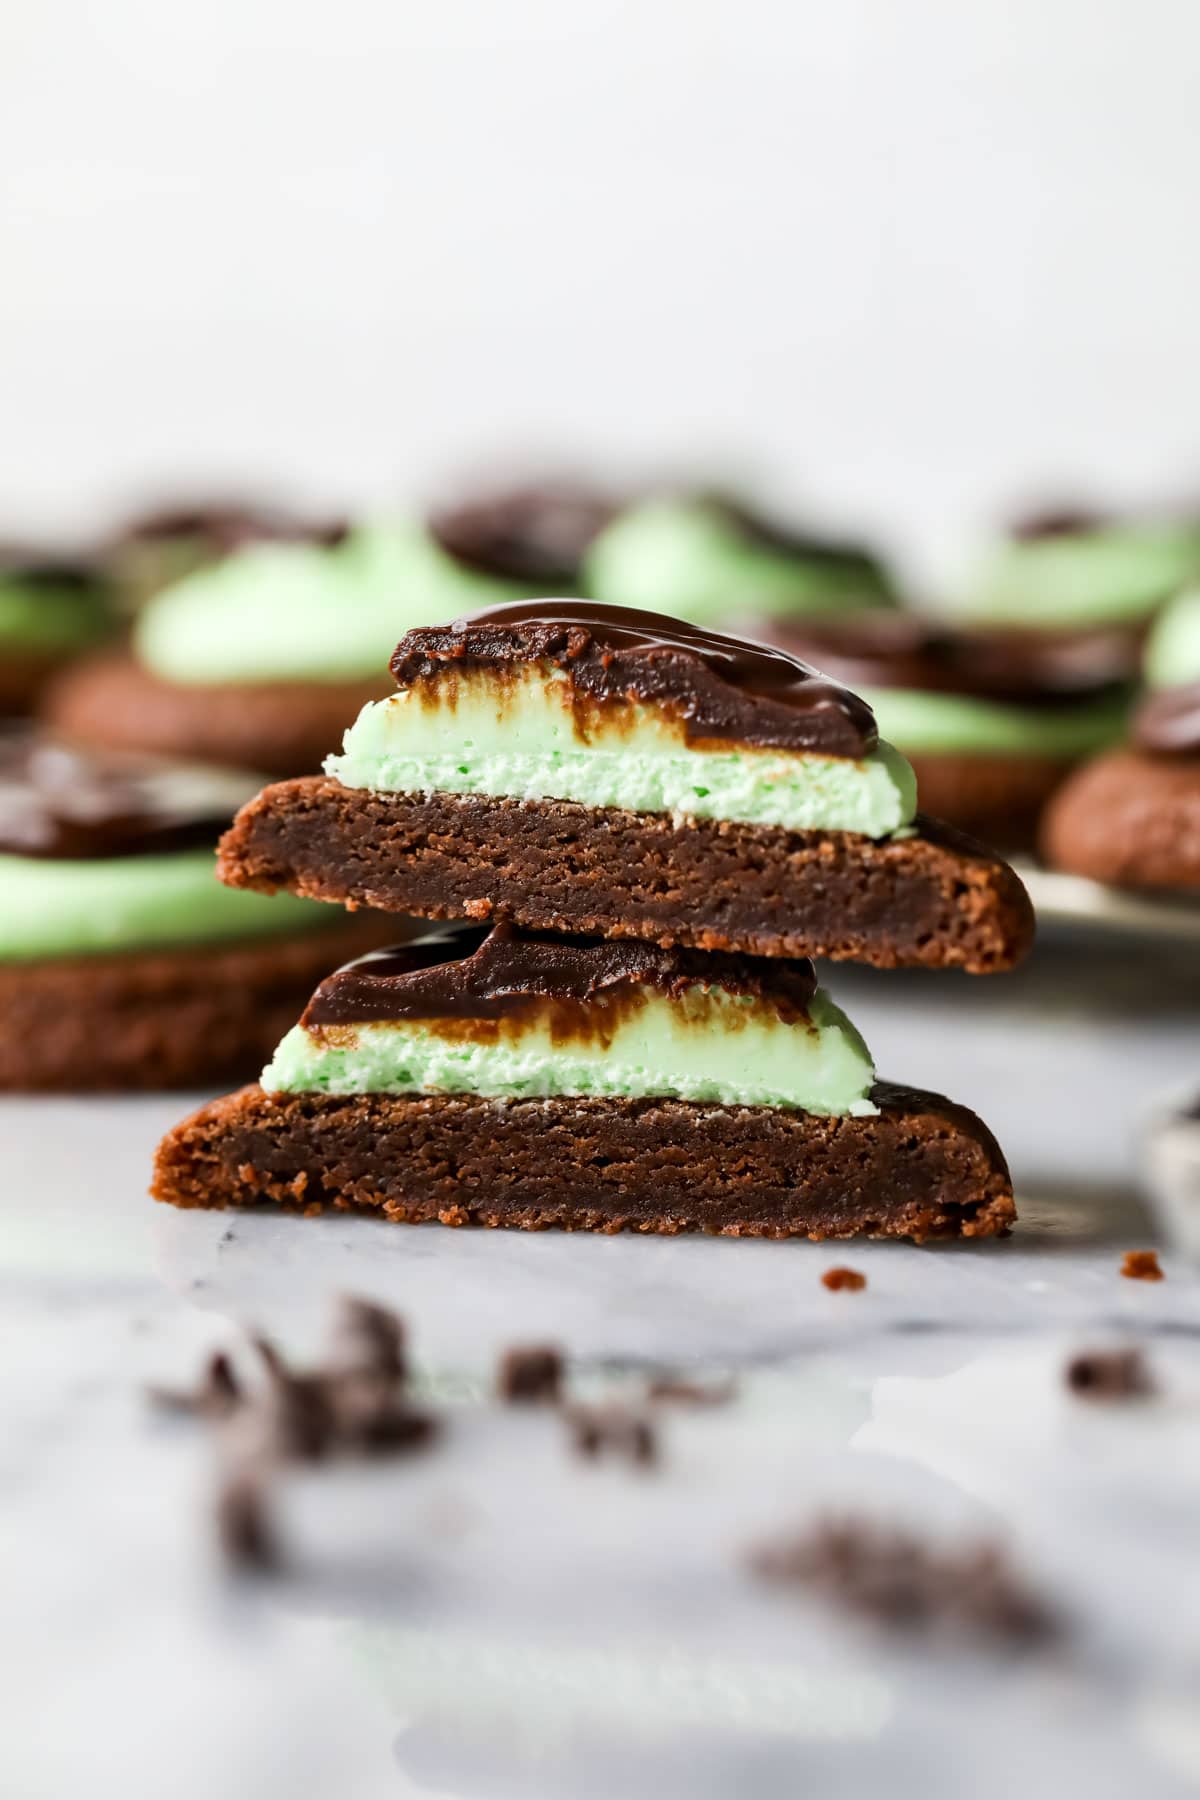 Two halves of a mint chocolate cookie made with a chocolate cookie base, mint frosting, and chocolate ganache stacked on top of each other.